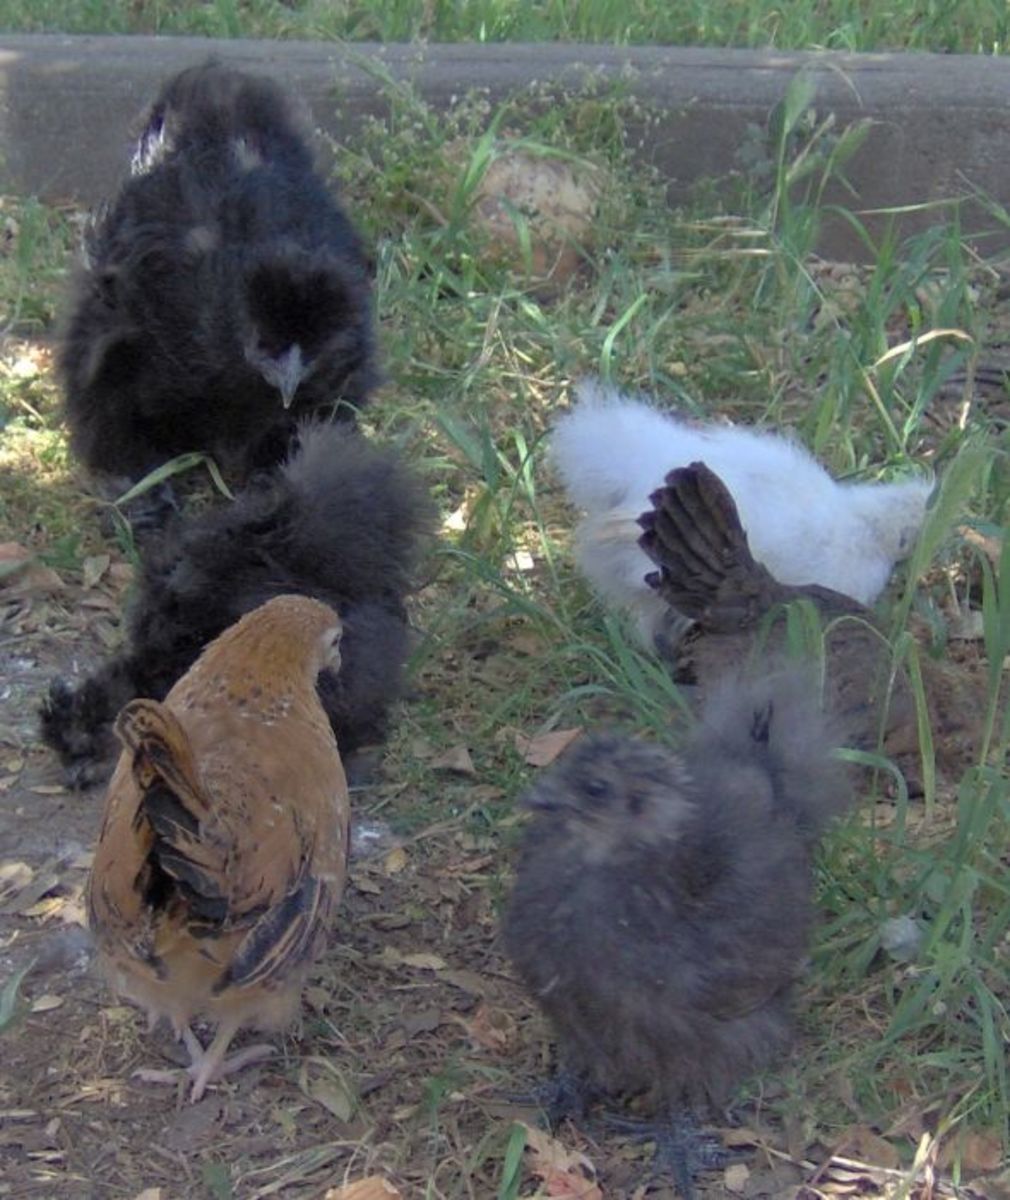 Various chicks free-ranging. The little ones in the picture had all been raised together and were the best of friends.